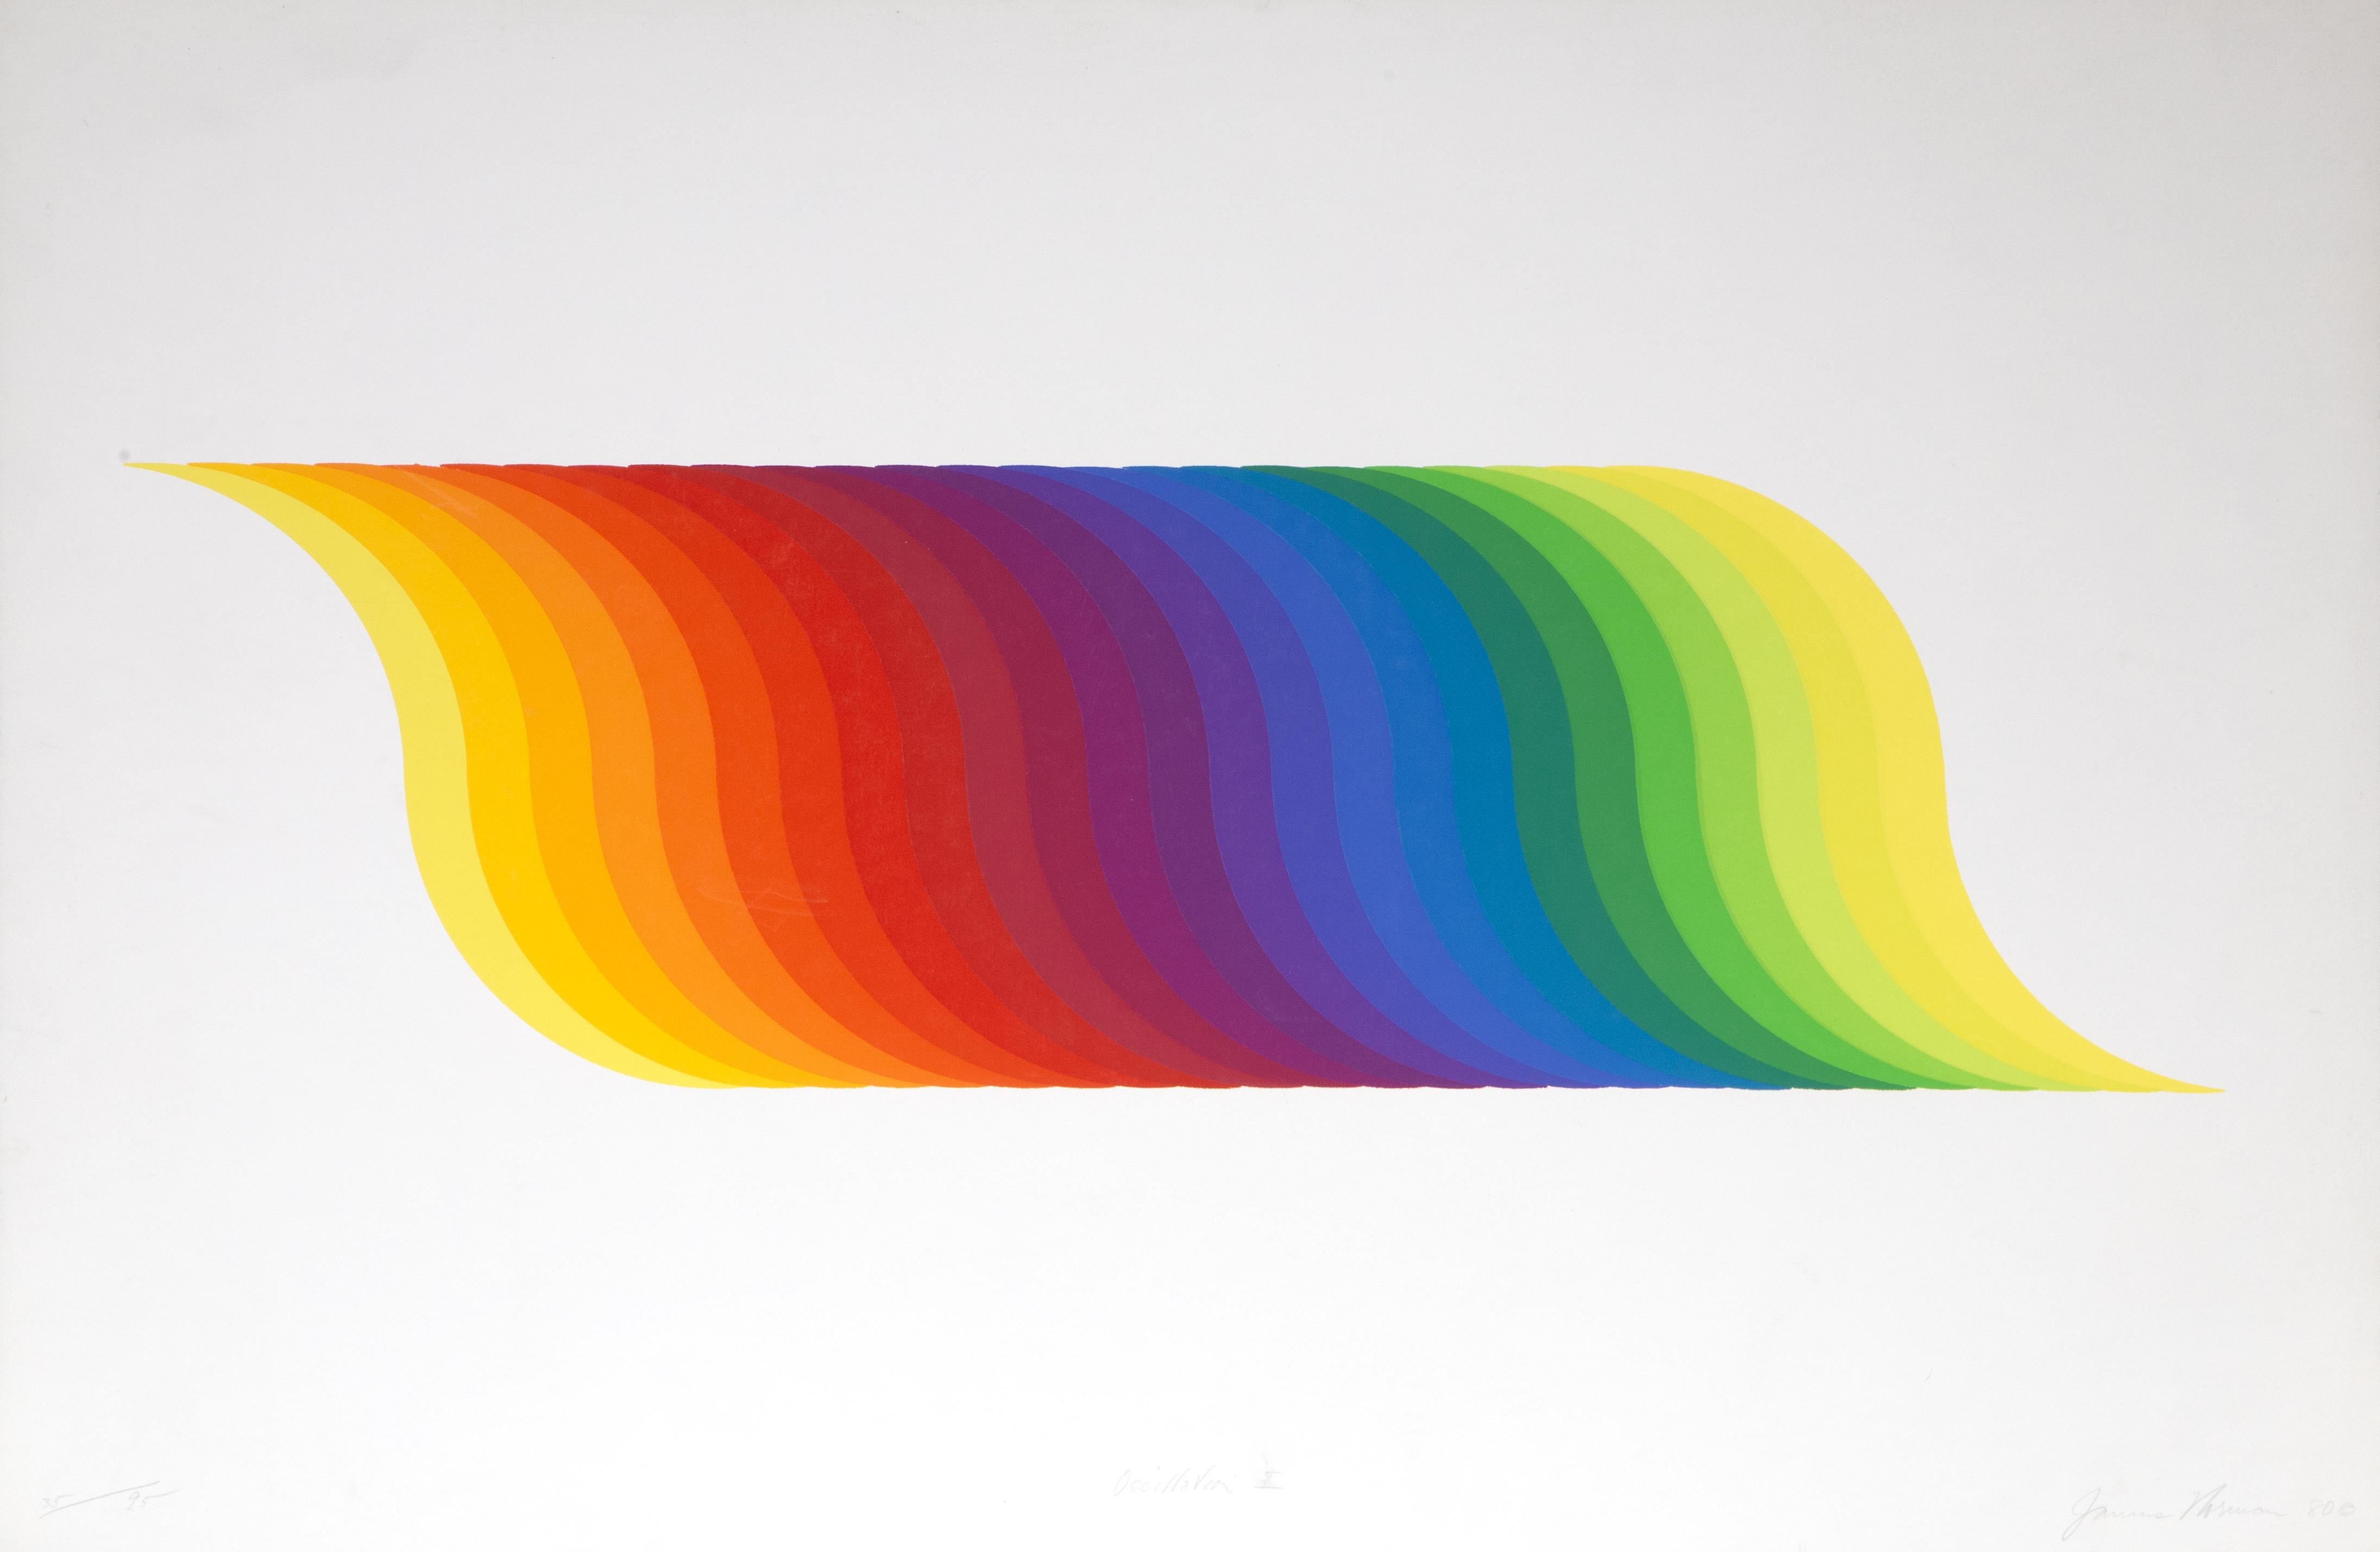 Artist: James Norman, American (1927 - 2011)
Title: Oscillation I
Year: 1980
Medium: Screenprint, signed and numbered in pencil
Edition: 35/95
Image Size: 10 x 33 inches
Size: 25 x 38 in. (63.5 x 96.52 cm)